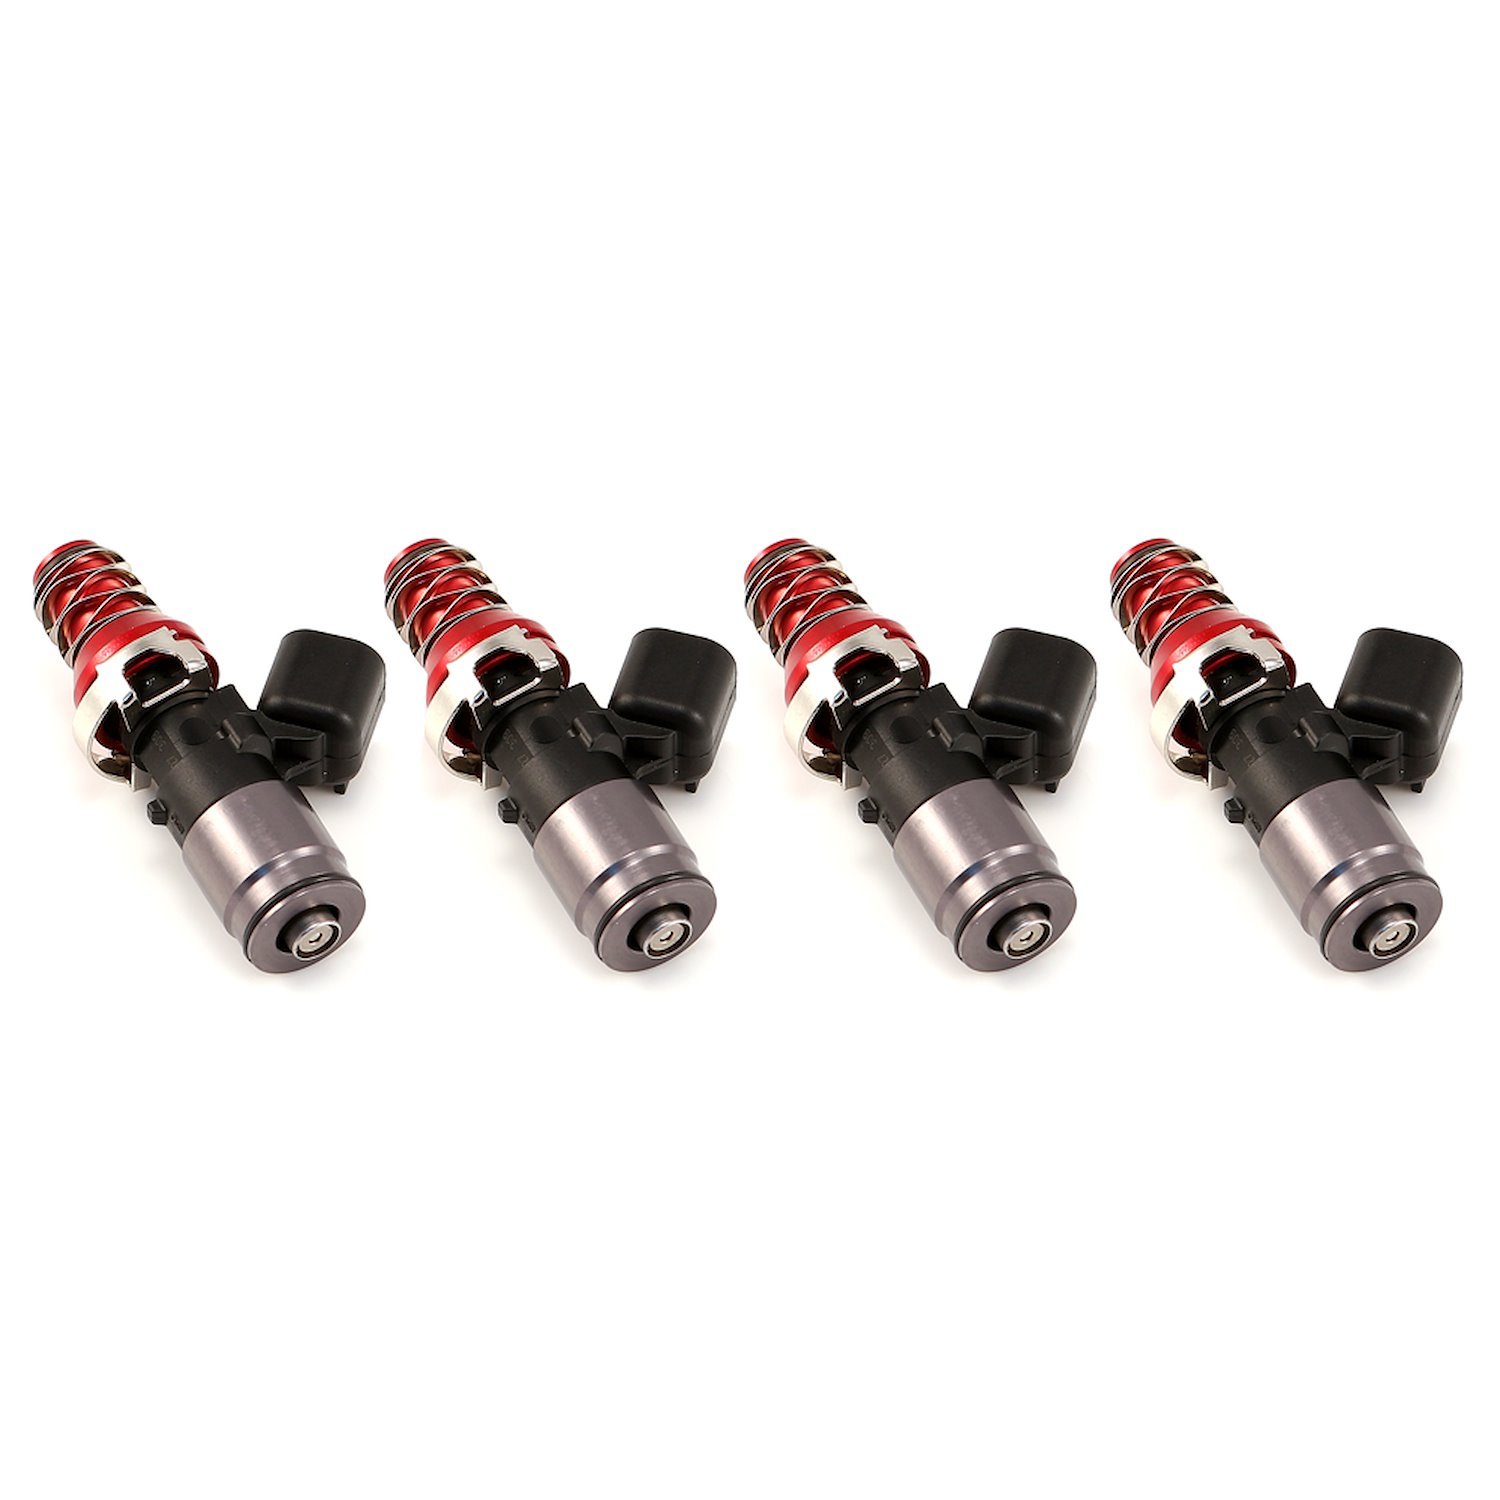 1300.48.11.WRX.4 1340cc Fuel Injector Set, 48 mm Length, 11 mm Gold Top/Denso, 204 Lower Cushion